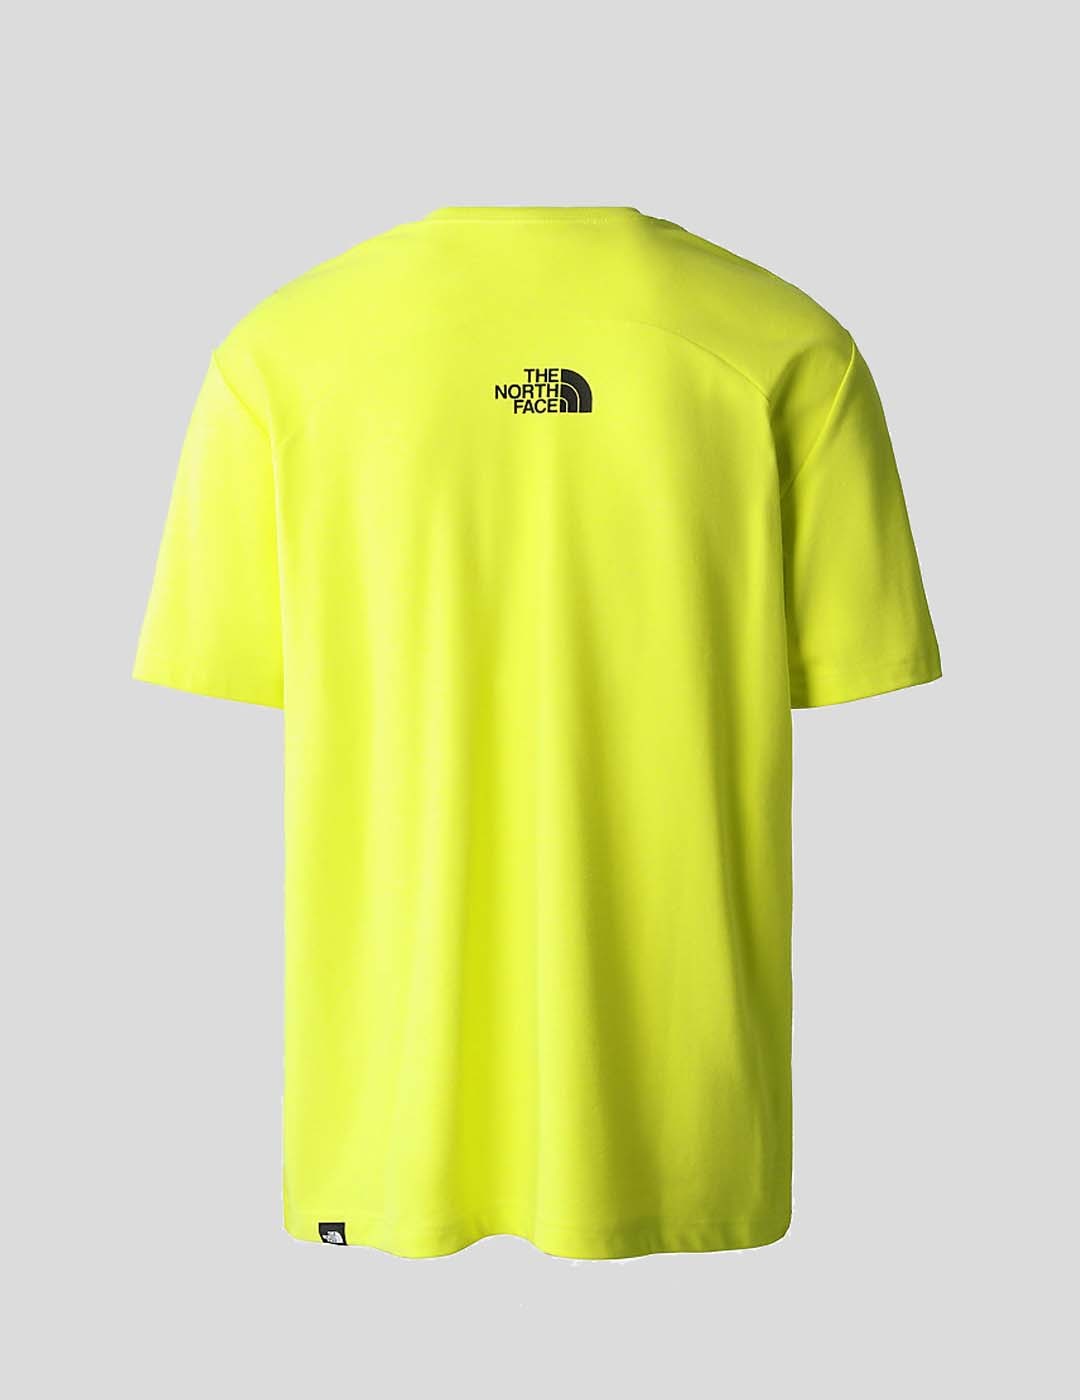 CAMISETA THE NORTH FACE GRAPHIC TEE  LED YELLOW